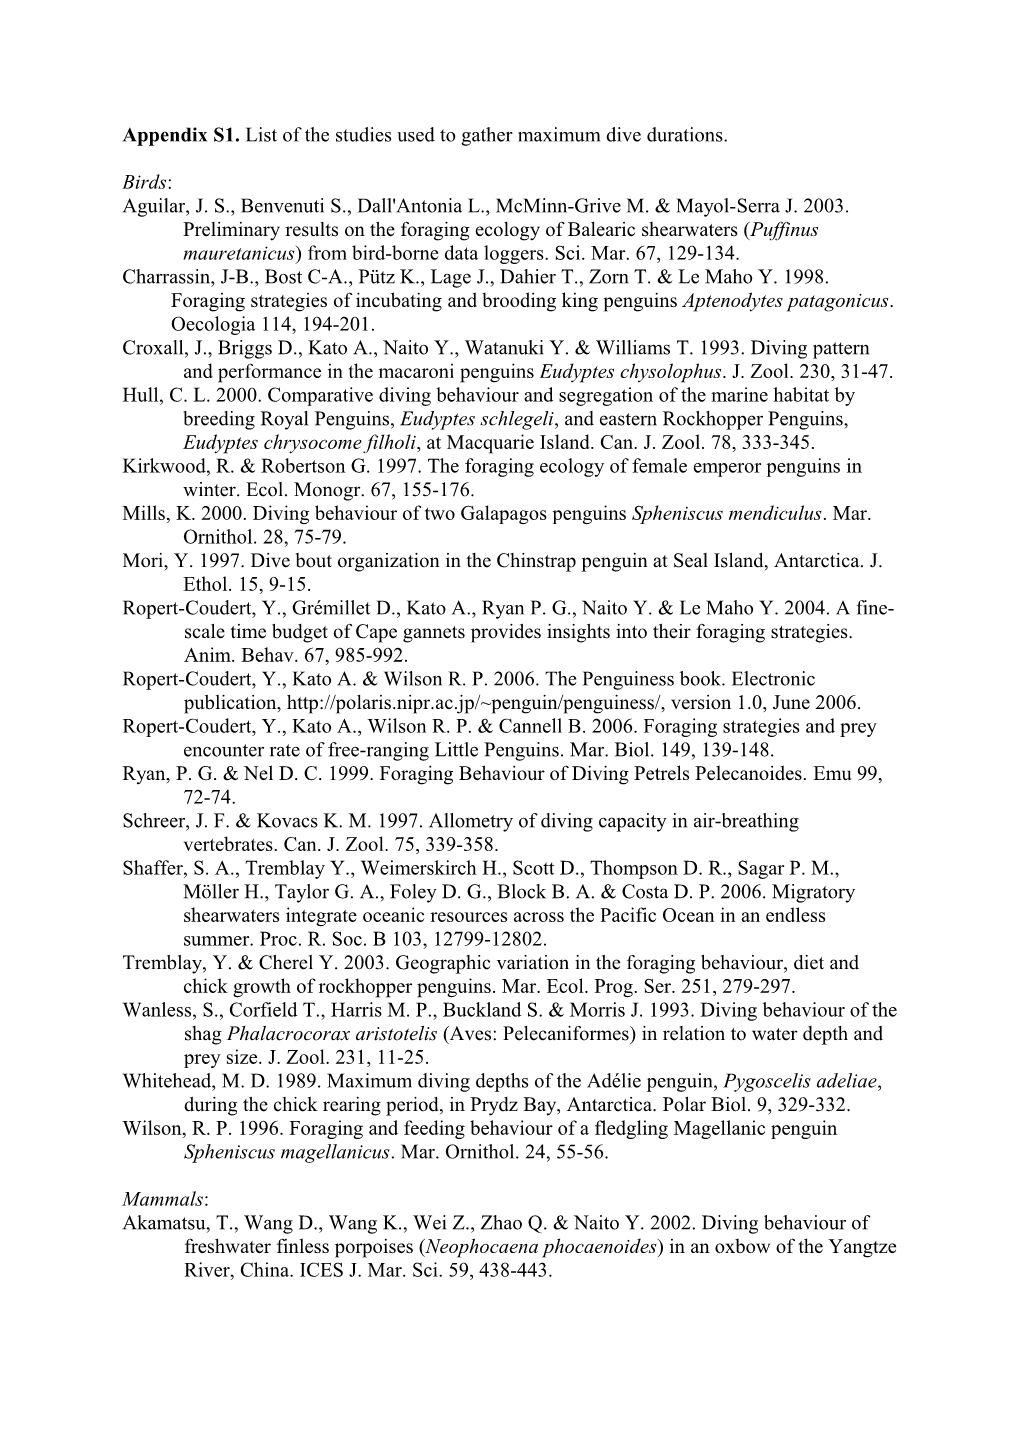 Appendix S1. List of the Studies Used to Gather Maximum Dive Durations